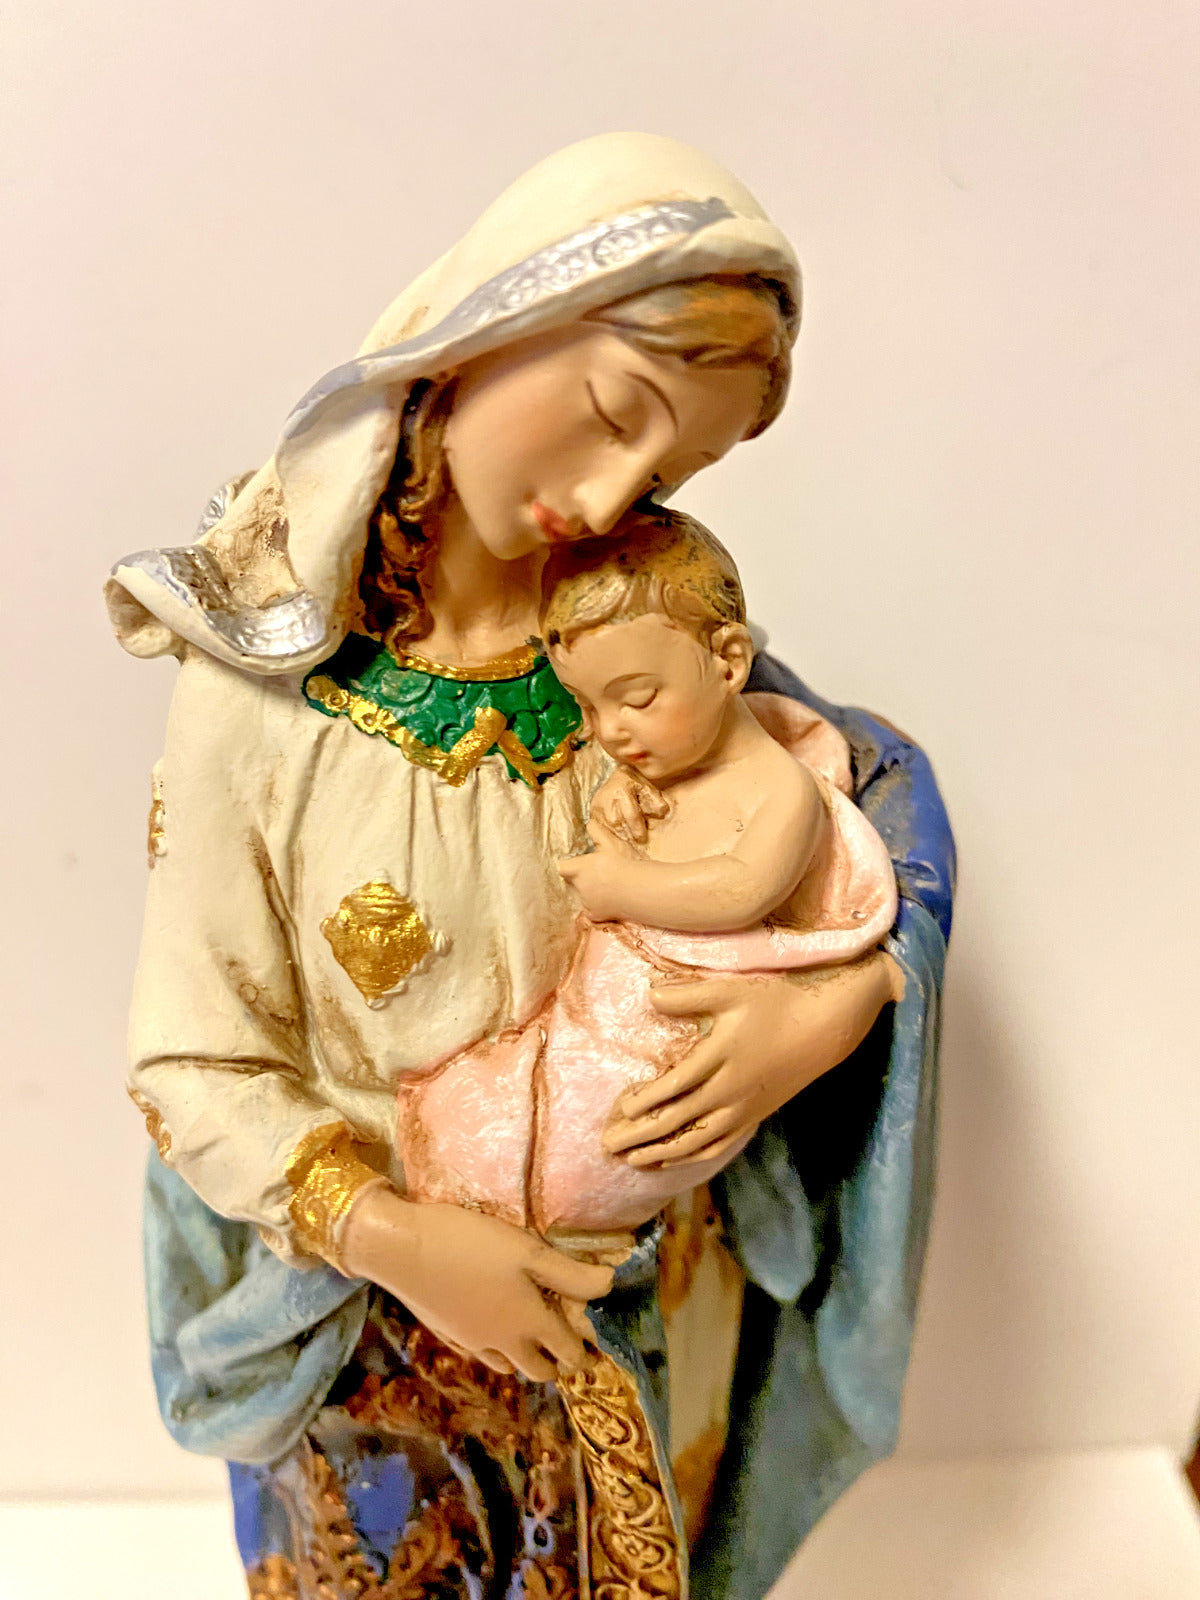 Adoring Blessed Mother & Child Jesus Statue 7 1/8" Statue, New